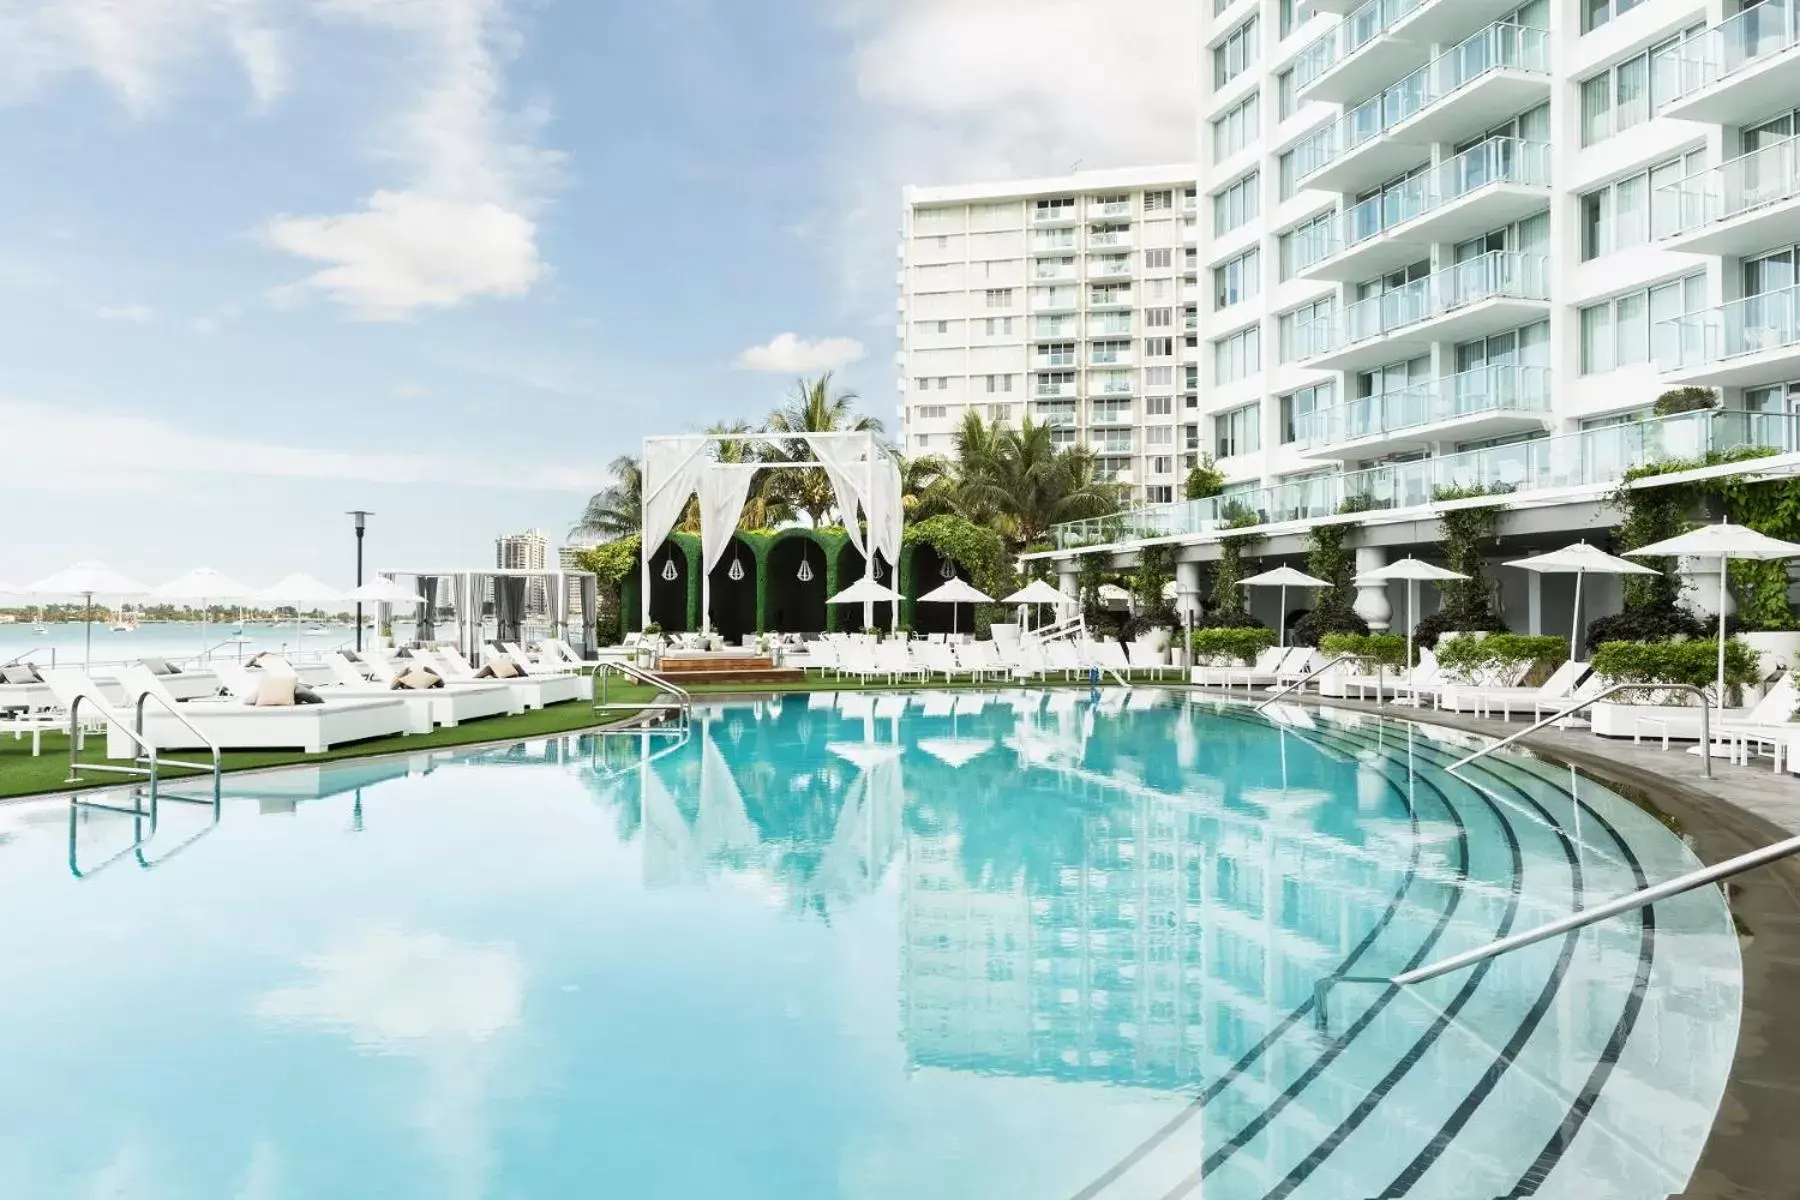 On site, Swimming Pool in Mondrian South Beach